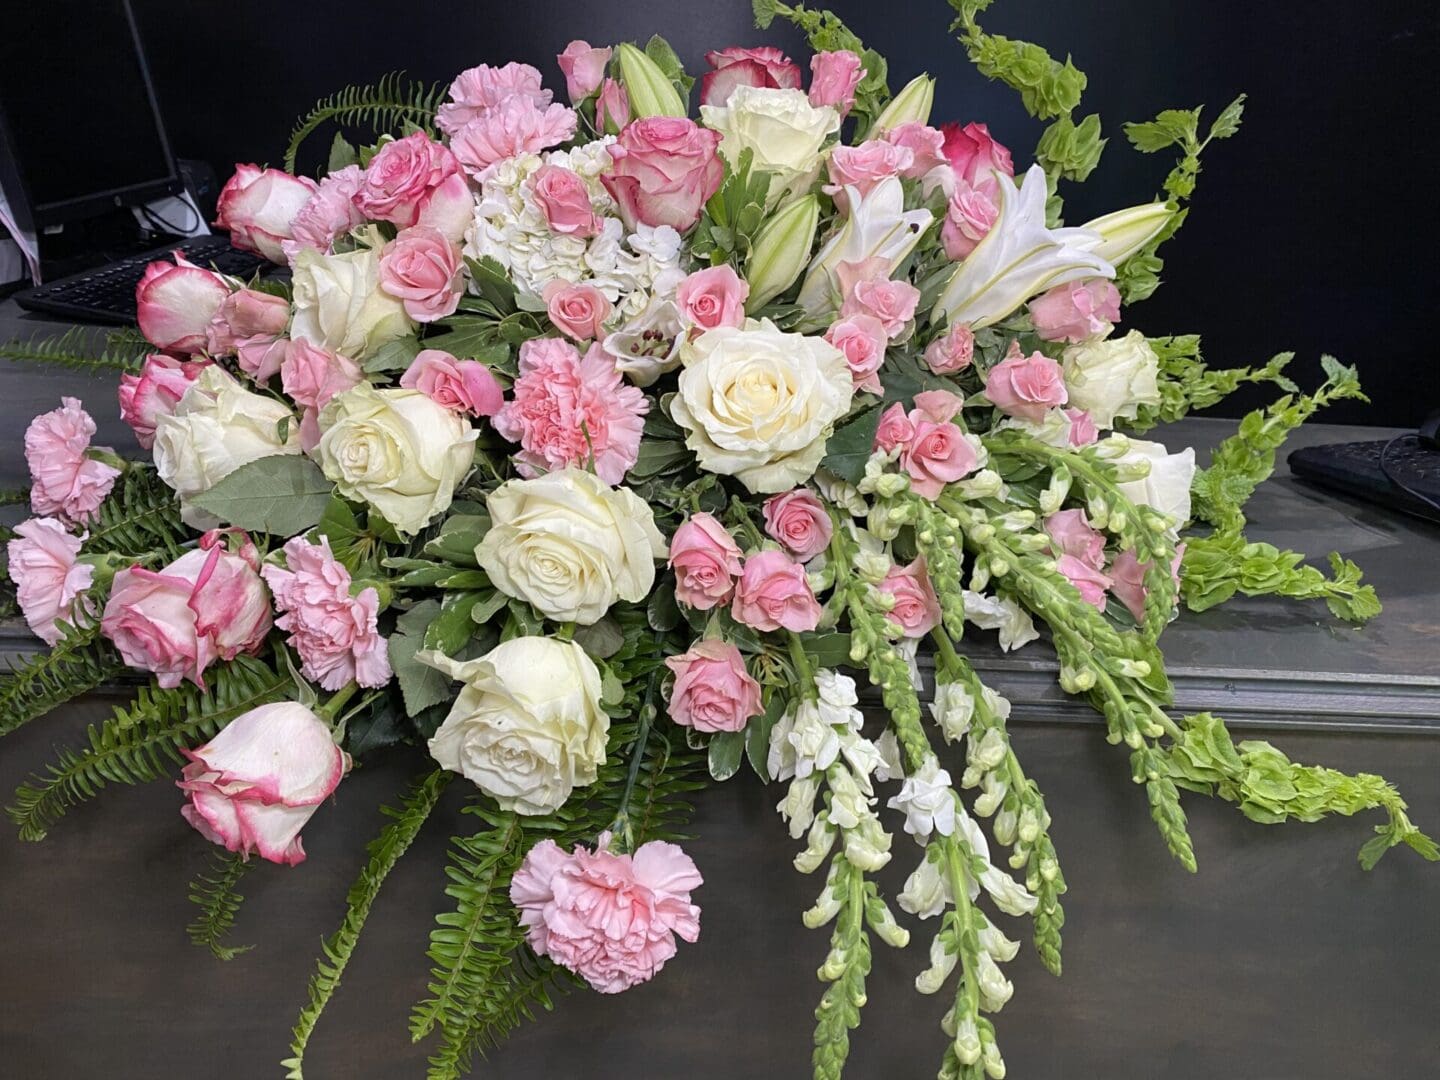 A batch of pink and white flowers